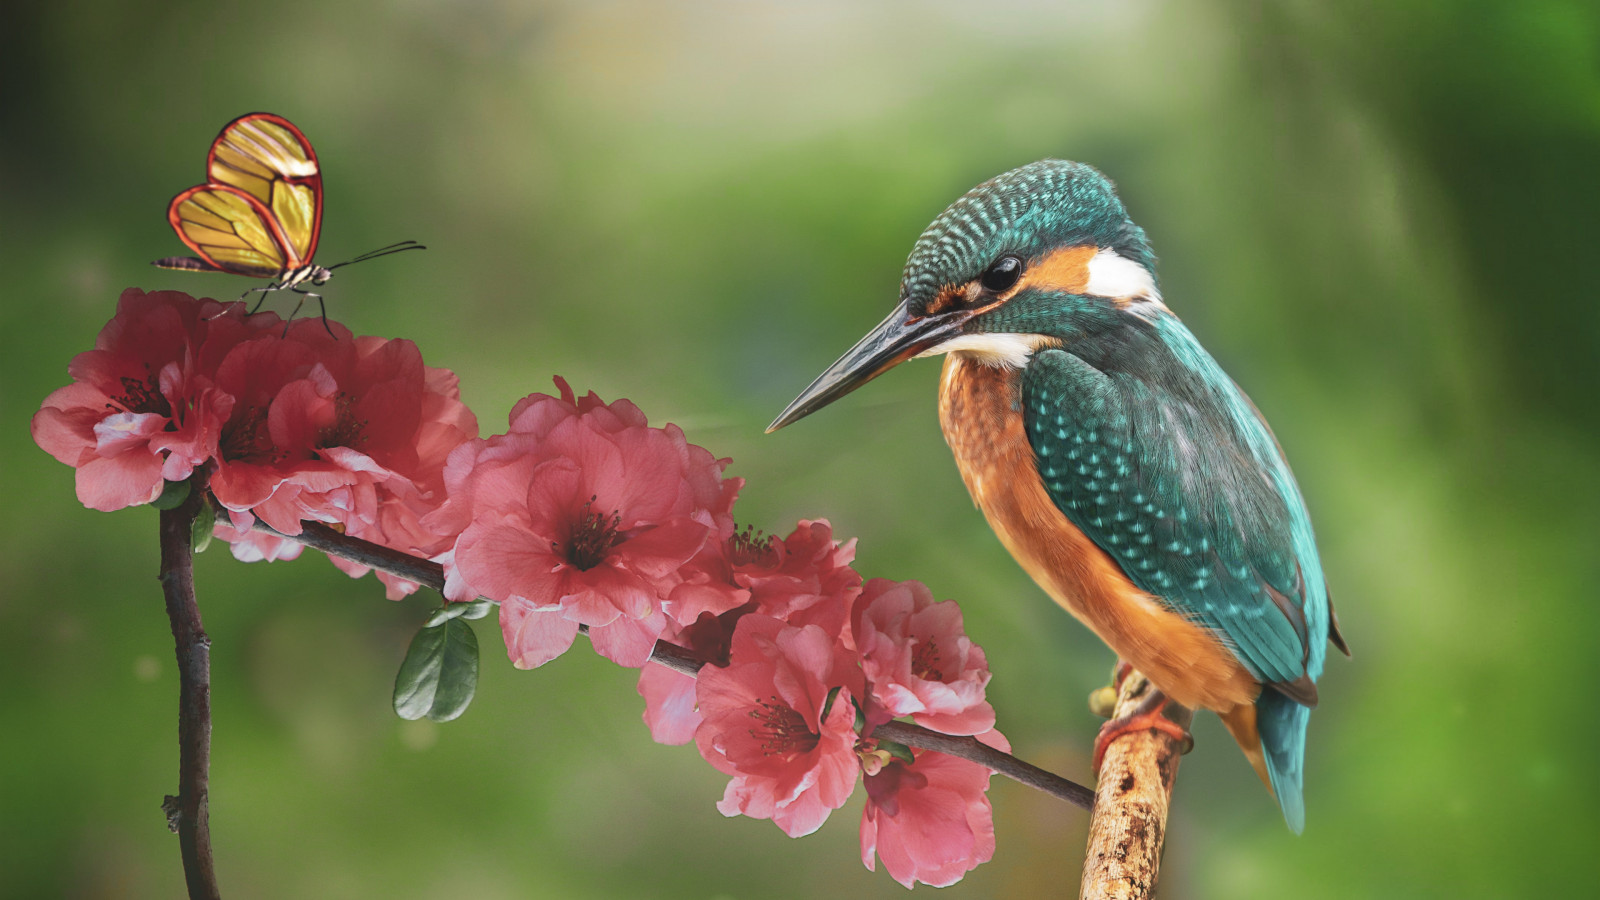 Kingfisher and the butterfly wallpaper 1600x900